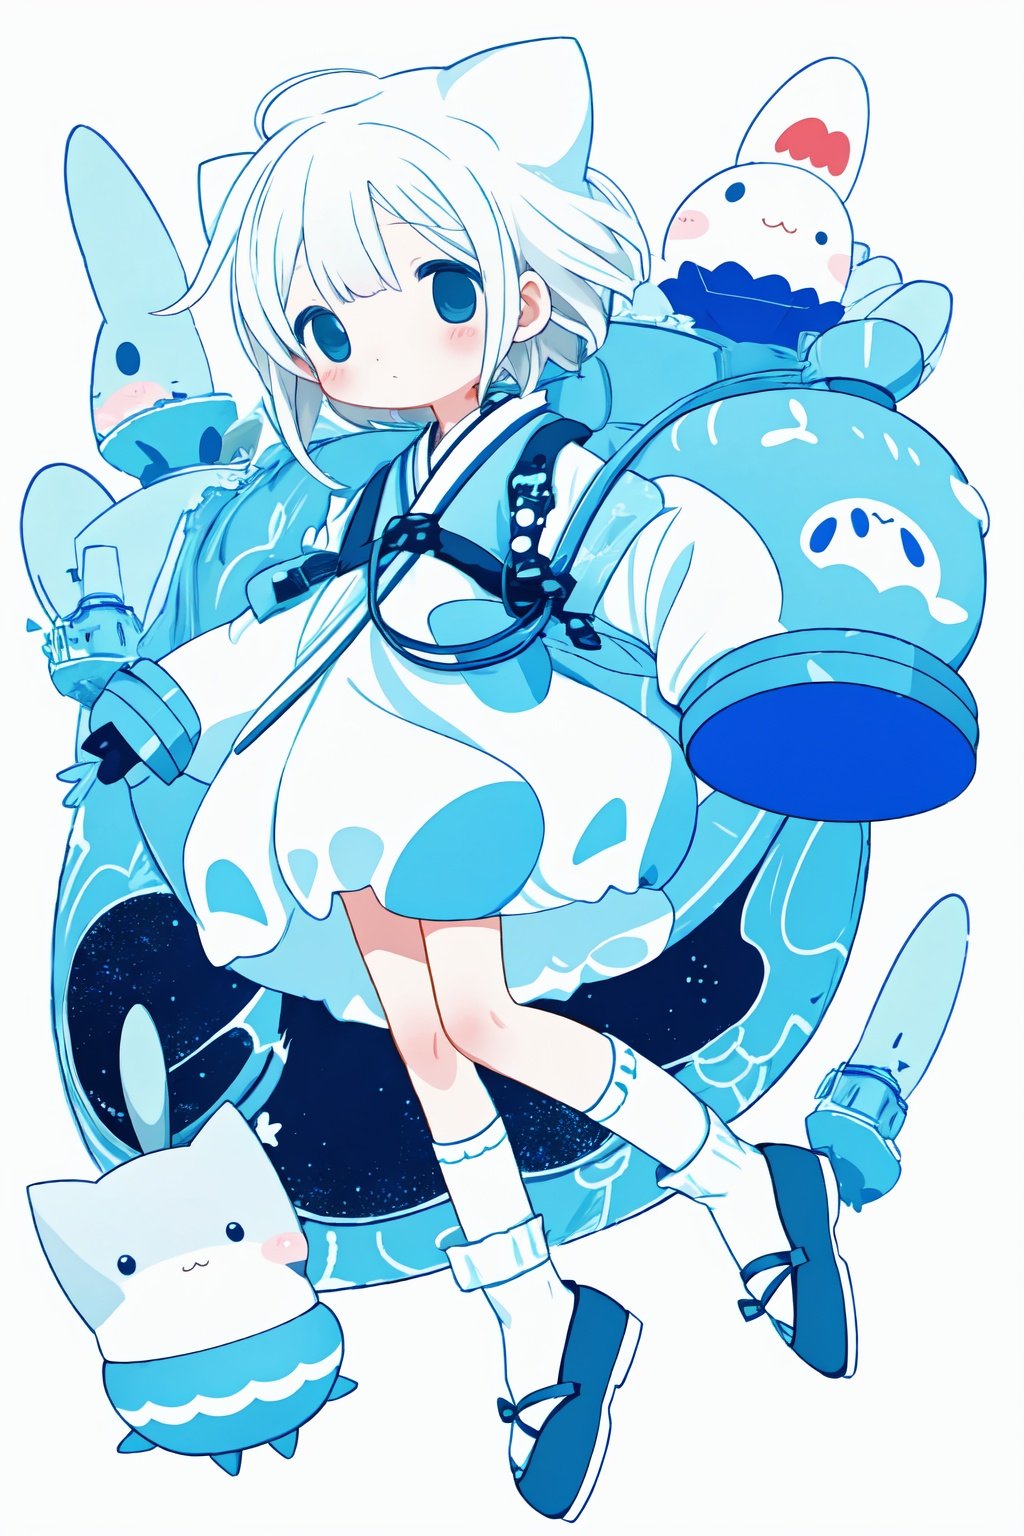 style of Chiho Aoshima, cute, a girl, white hair, puffy dress, full body, blue hue, simple white background, Illustration, Ink, japan, minimalistic, eguchistyle